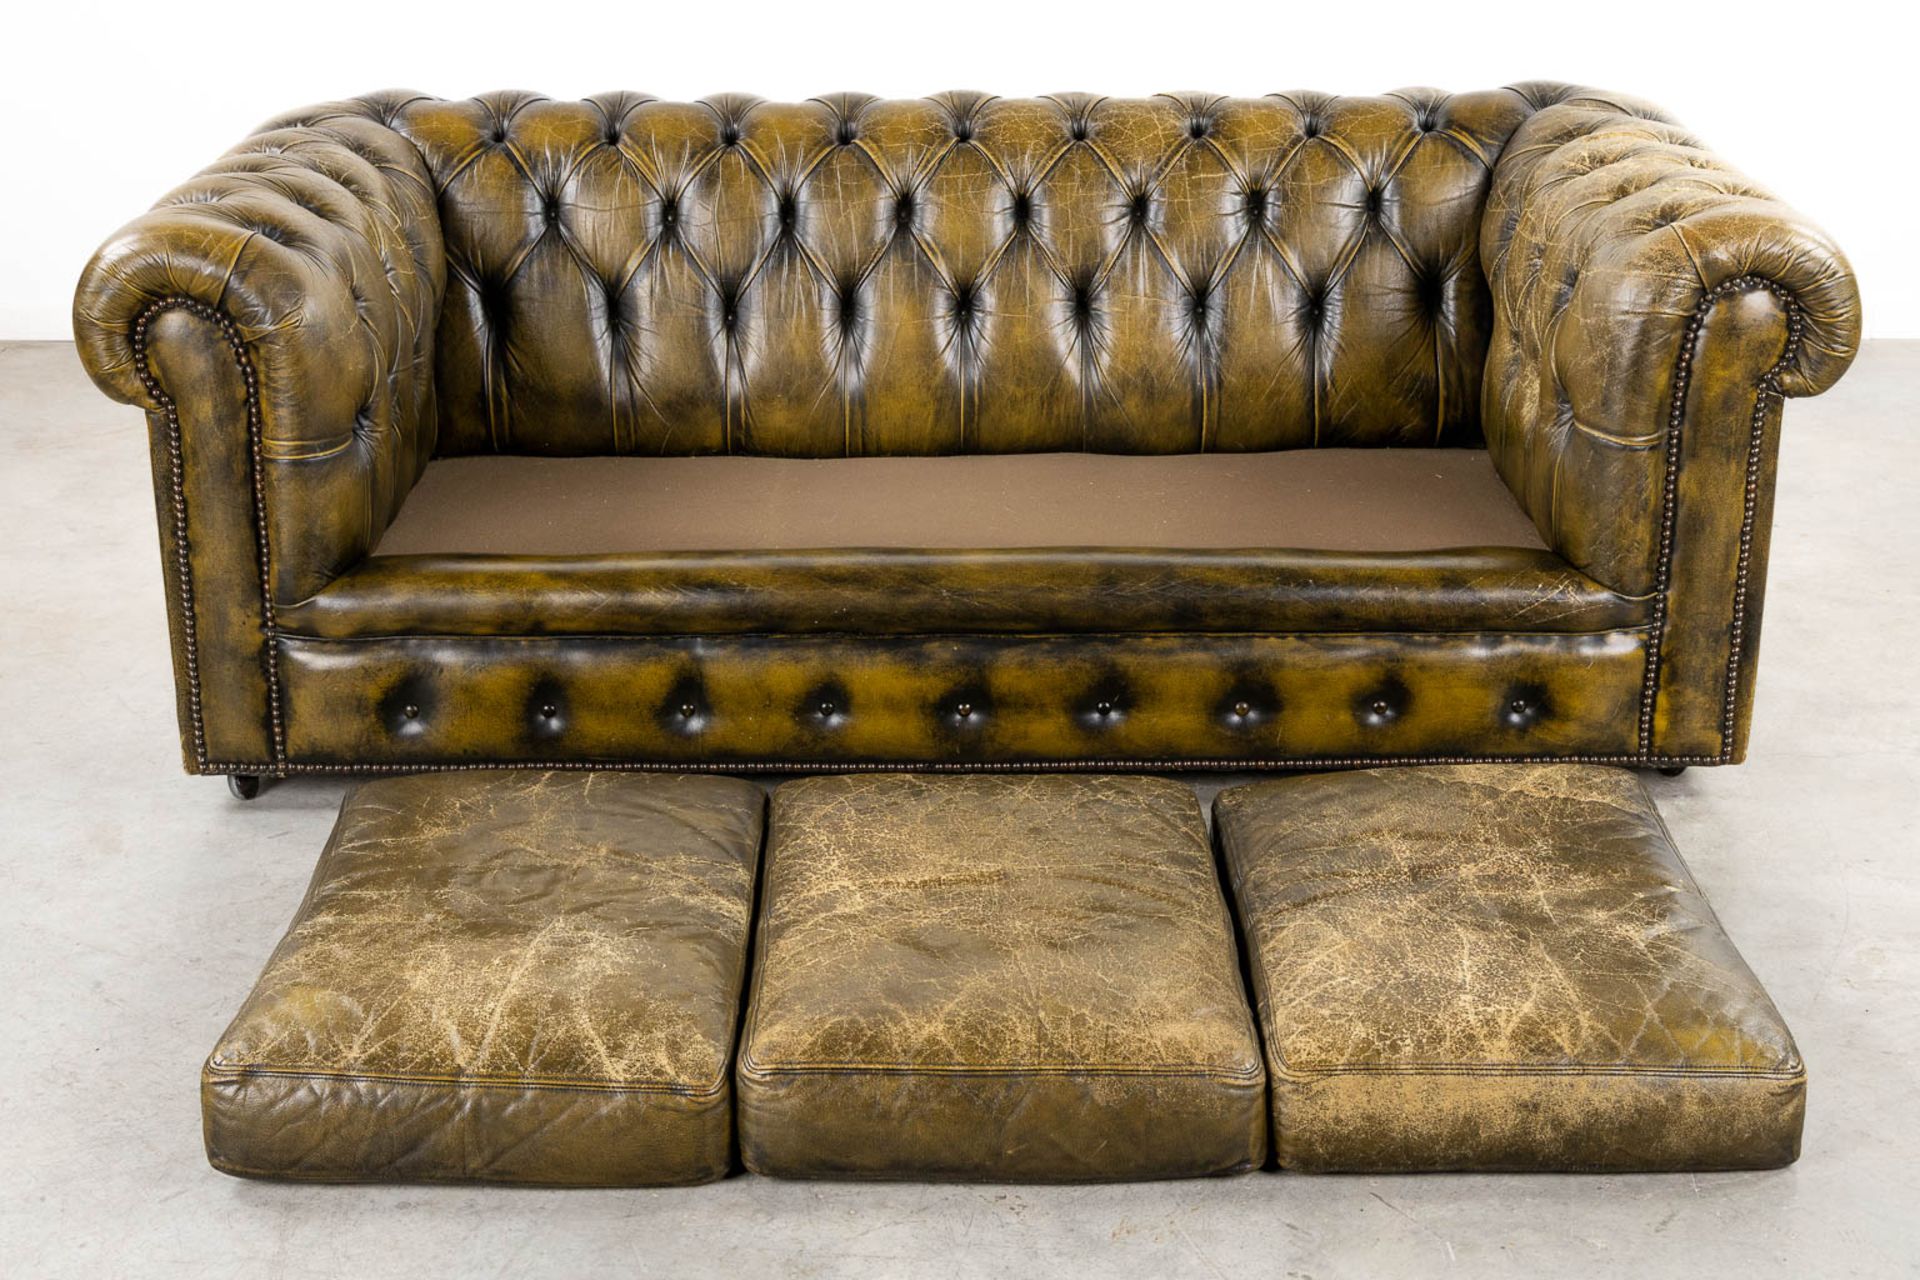 A Chesterfield three-person, green leather sofa. (L:90 x W:188 x H:68 cm) - Image 7 of 13